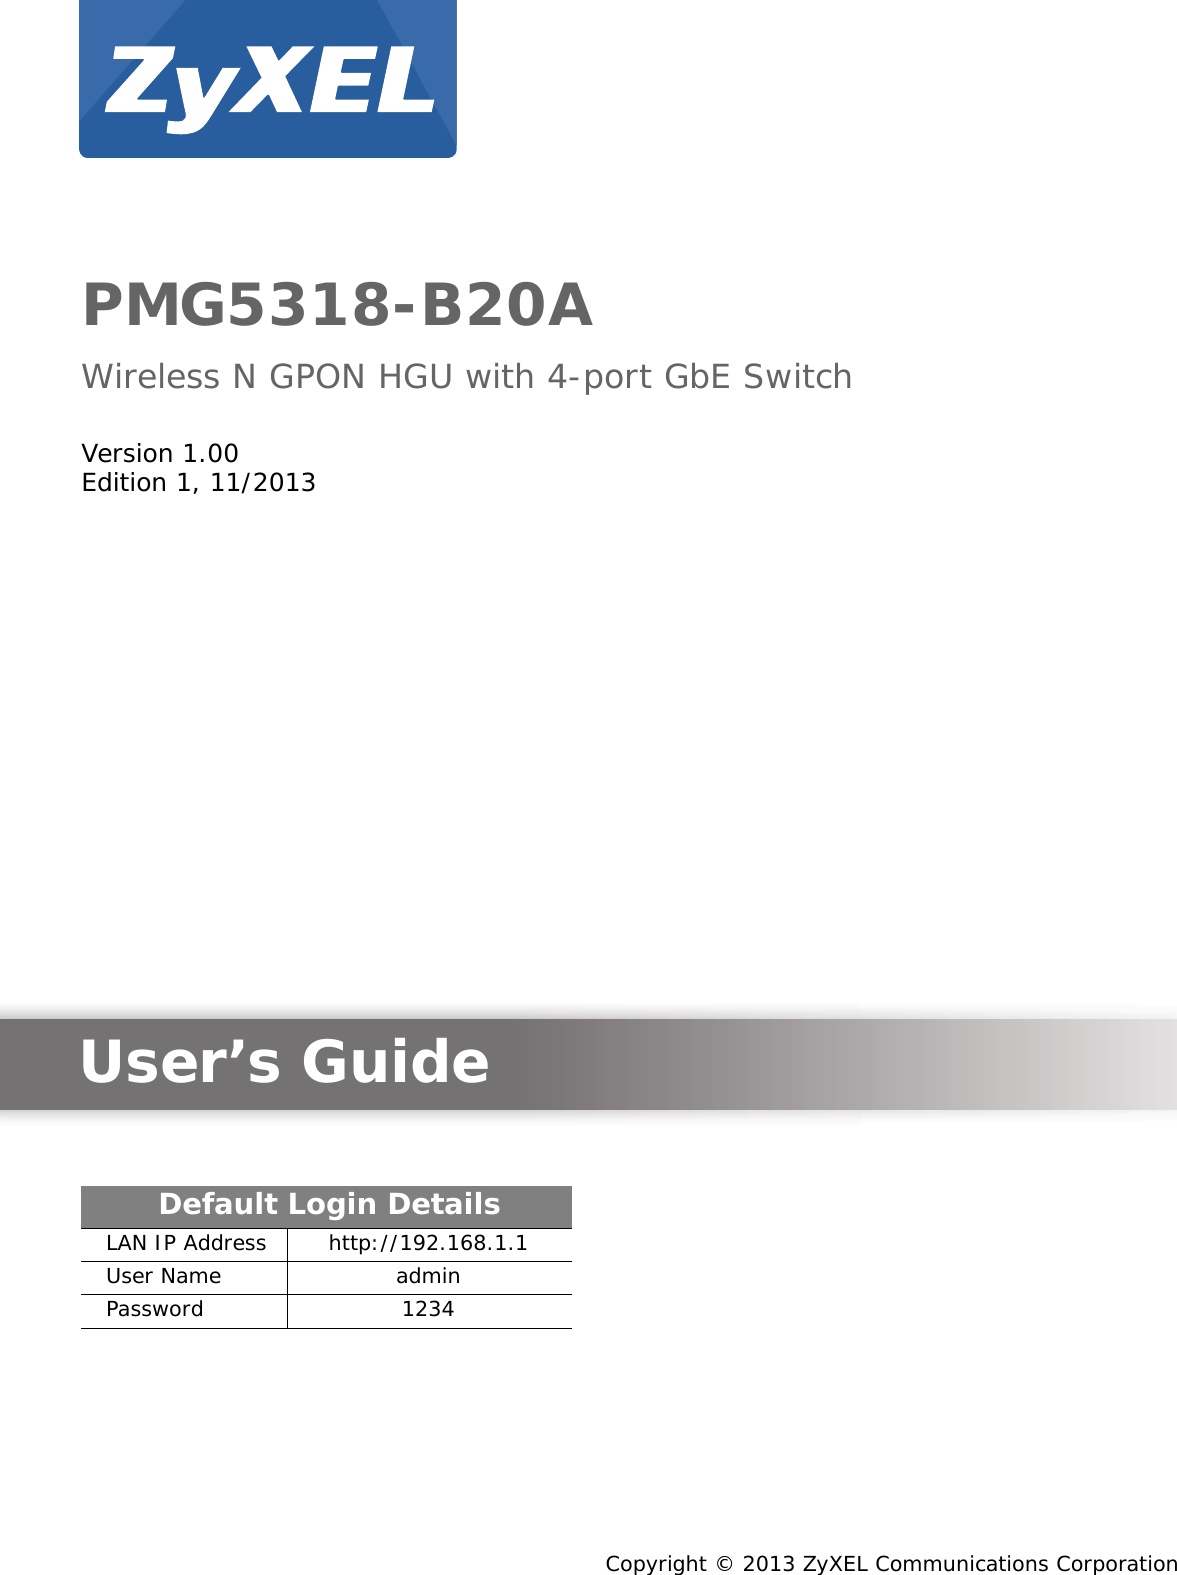 Quick Start Guidewww.zyxel.comPMG5318-B20AWireless N GPON HGU with 4-port GbE SwitchVersion 1.00Edition 1, 11/2013Copyright © 2013 ZyXEL Communications CorporationUser’s GuideDefault Login DetailsLAN IP Address http://192.168.1.1User Name adminPassword 1234